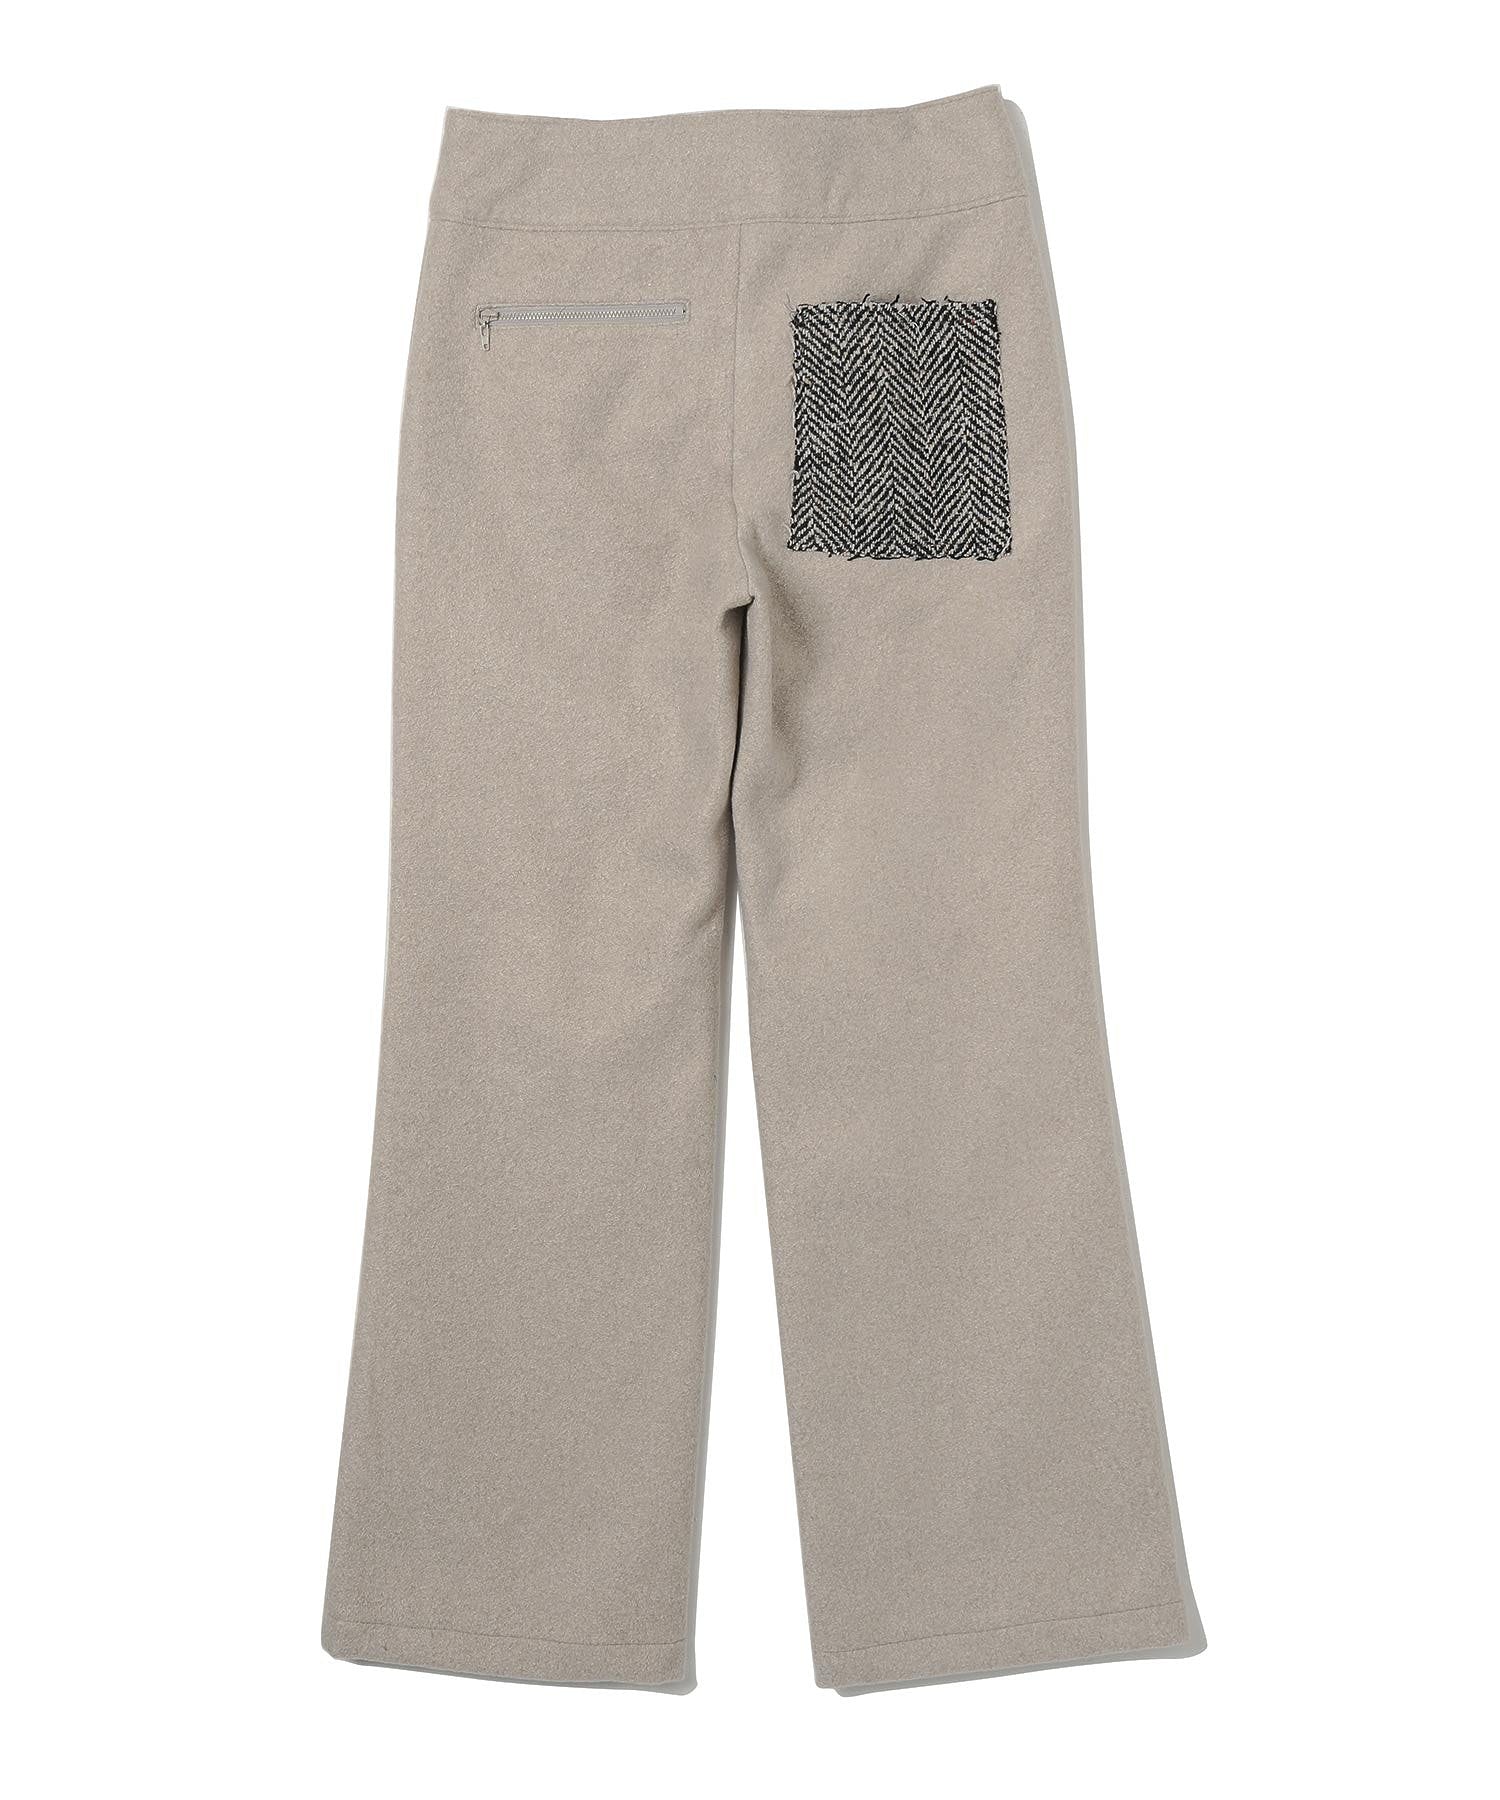 THE OPEN PRODUCT /ザオープンプロダクト/ RAW-CUT PATCHWORK PANTS/GTO224PT004